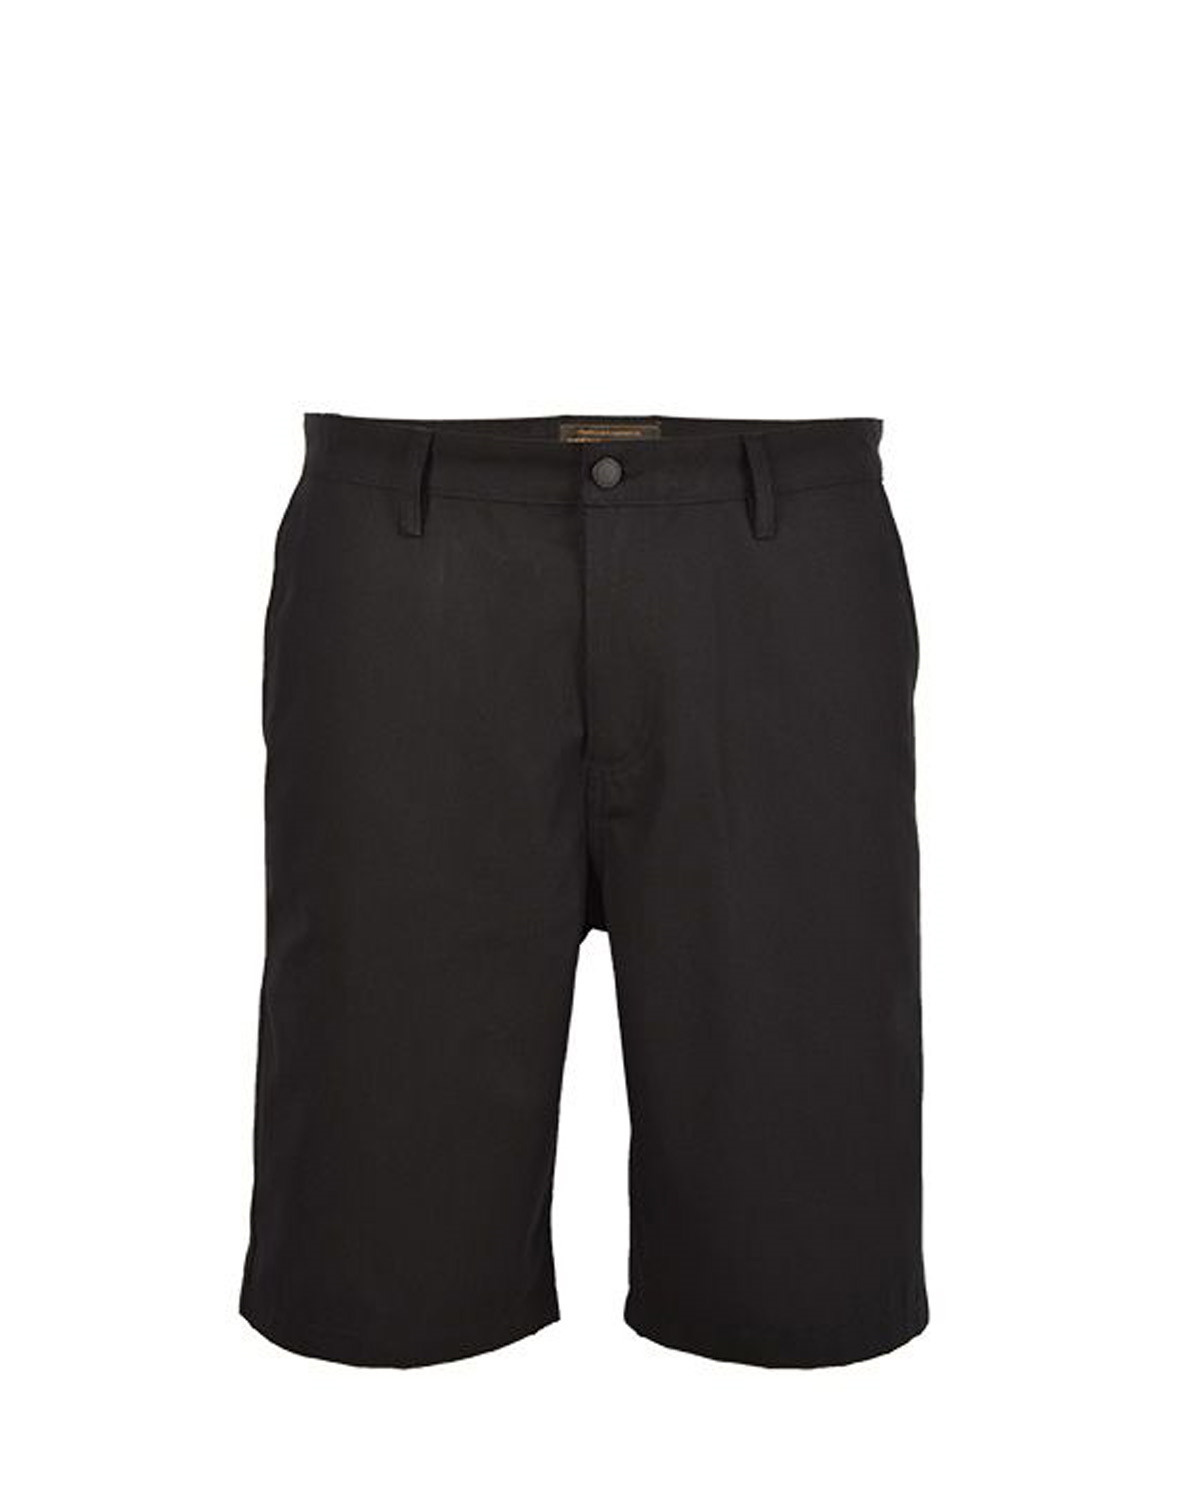 WRENCHMONKEES Simple Shorts (Sort, W33)